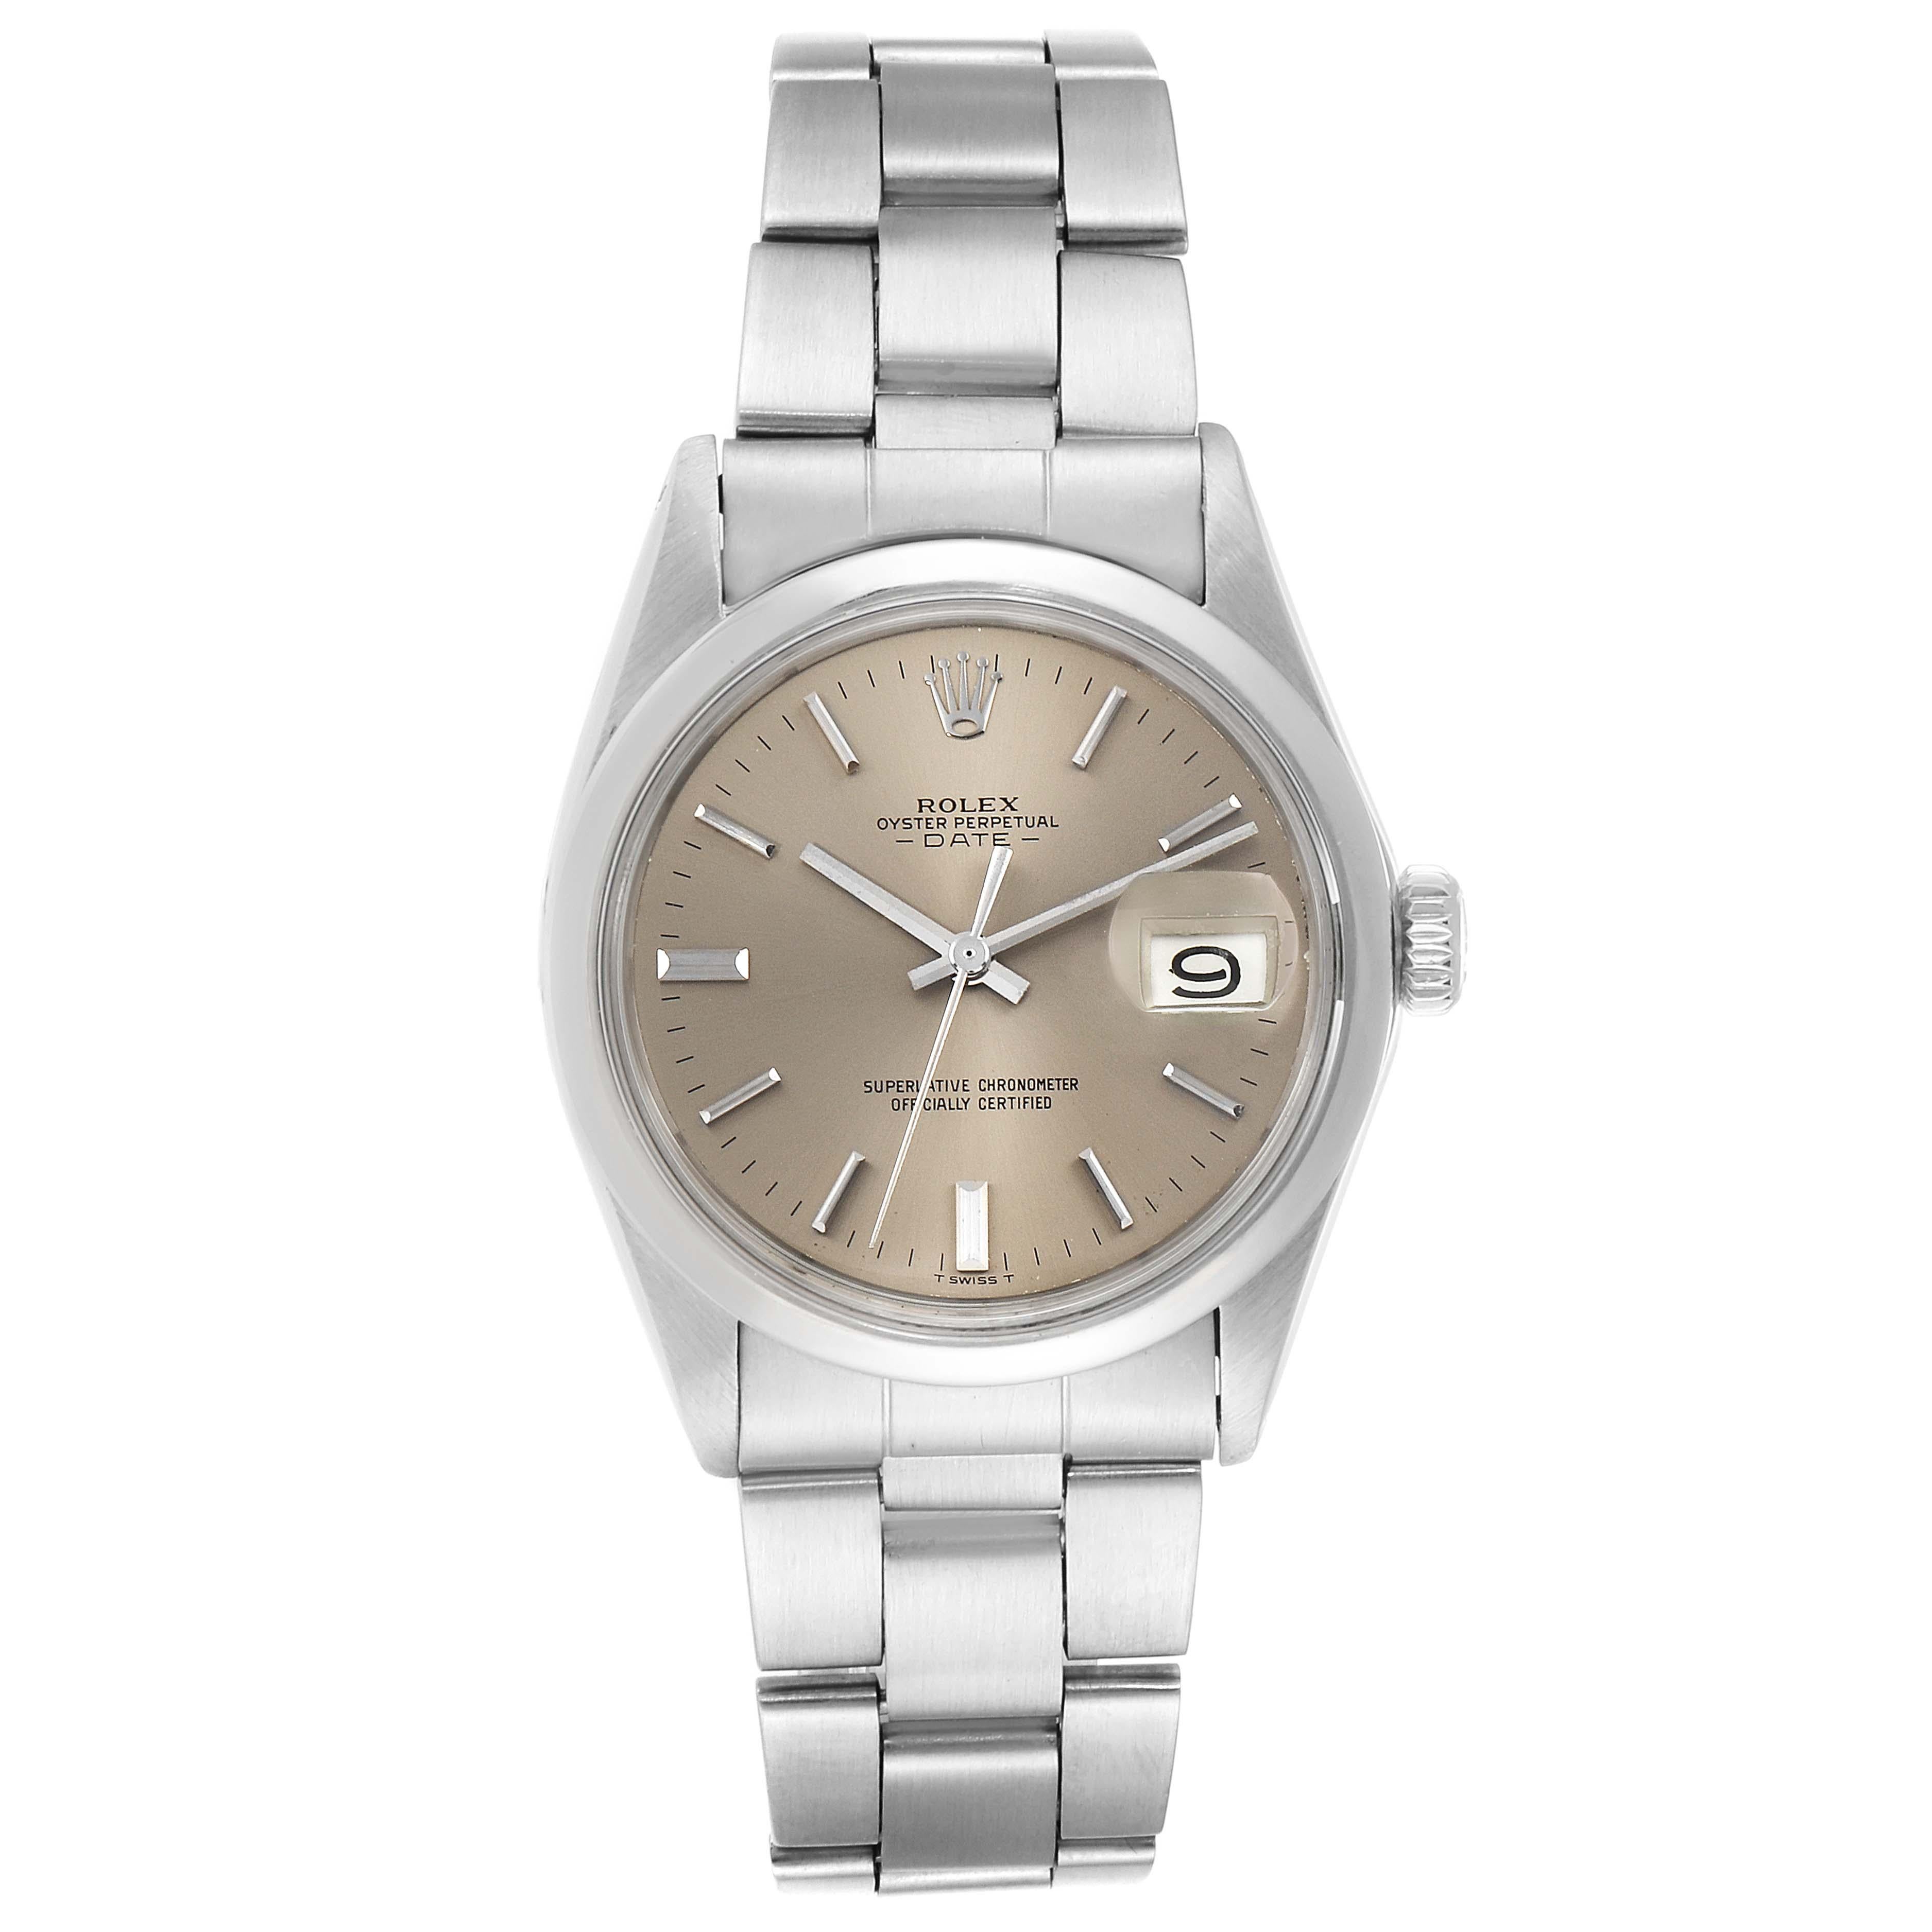 Rolex Date Grey Dial Domed Bezel Vintage Mens Watch 1500. Officially certified chronometer self-winding movement. Stainless steel oyster case 35.0 mm in diameter. Rolex logo on a crown. Stainless steel smooth domed bezel. Acrylic crystal with